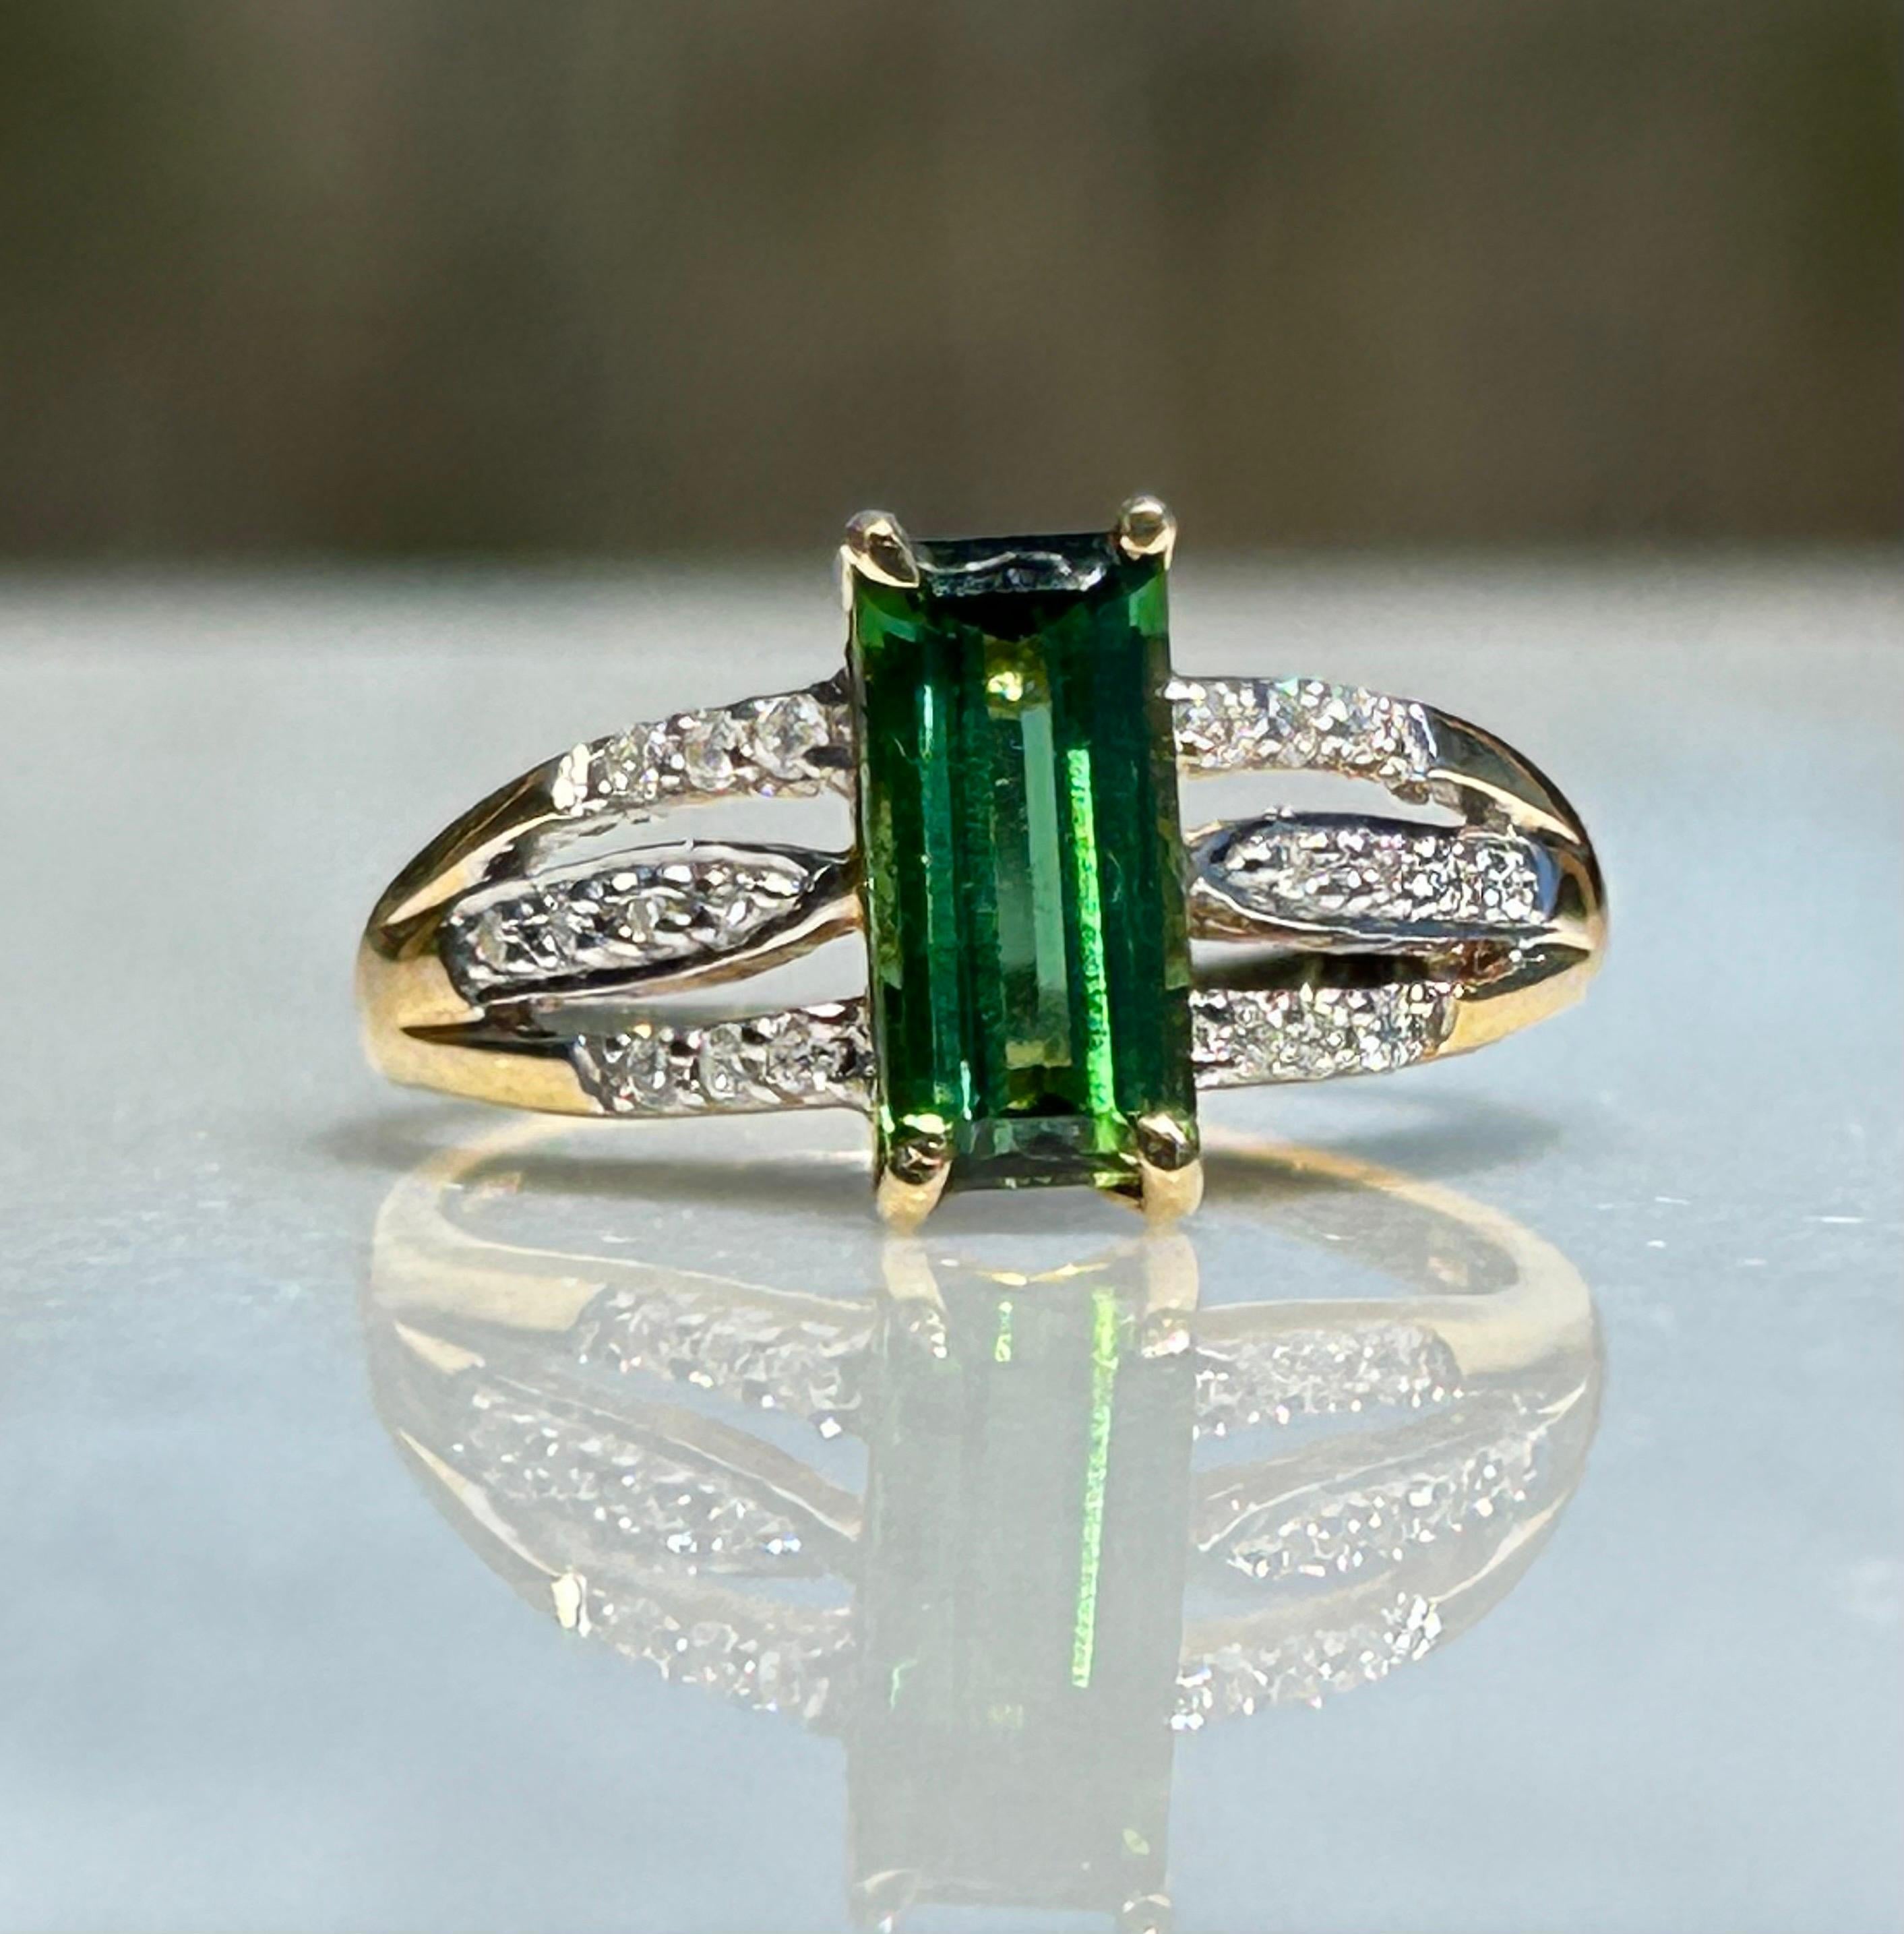 A 18K Yellow Gold Santa Rosa Tourmaline and Diamond ring, the head set with a claw mounted Emerald cut tourmaline and  three rows of diamonds to either shoulder, ring size 6.75 weight 3.6 grams
This exquisite ring features a captivating, super